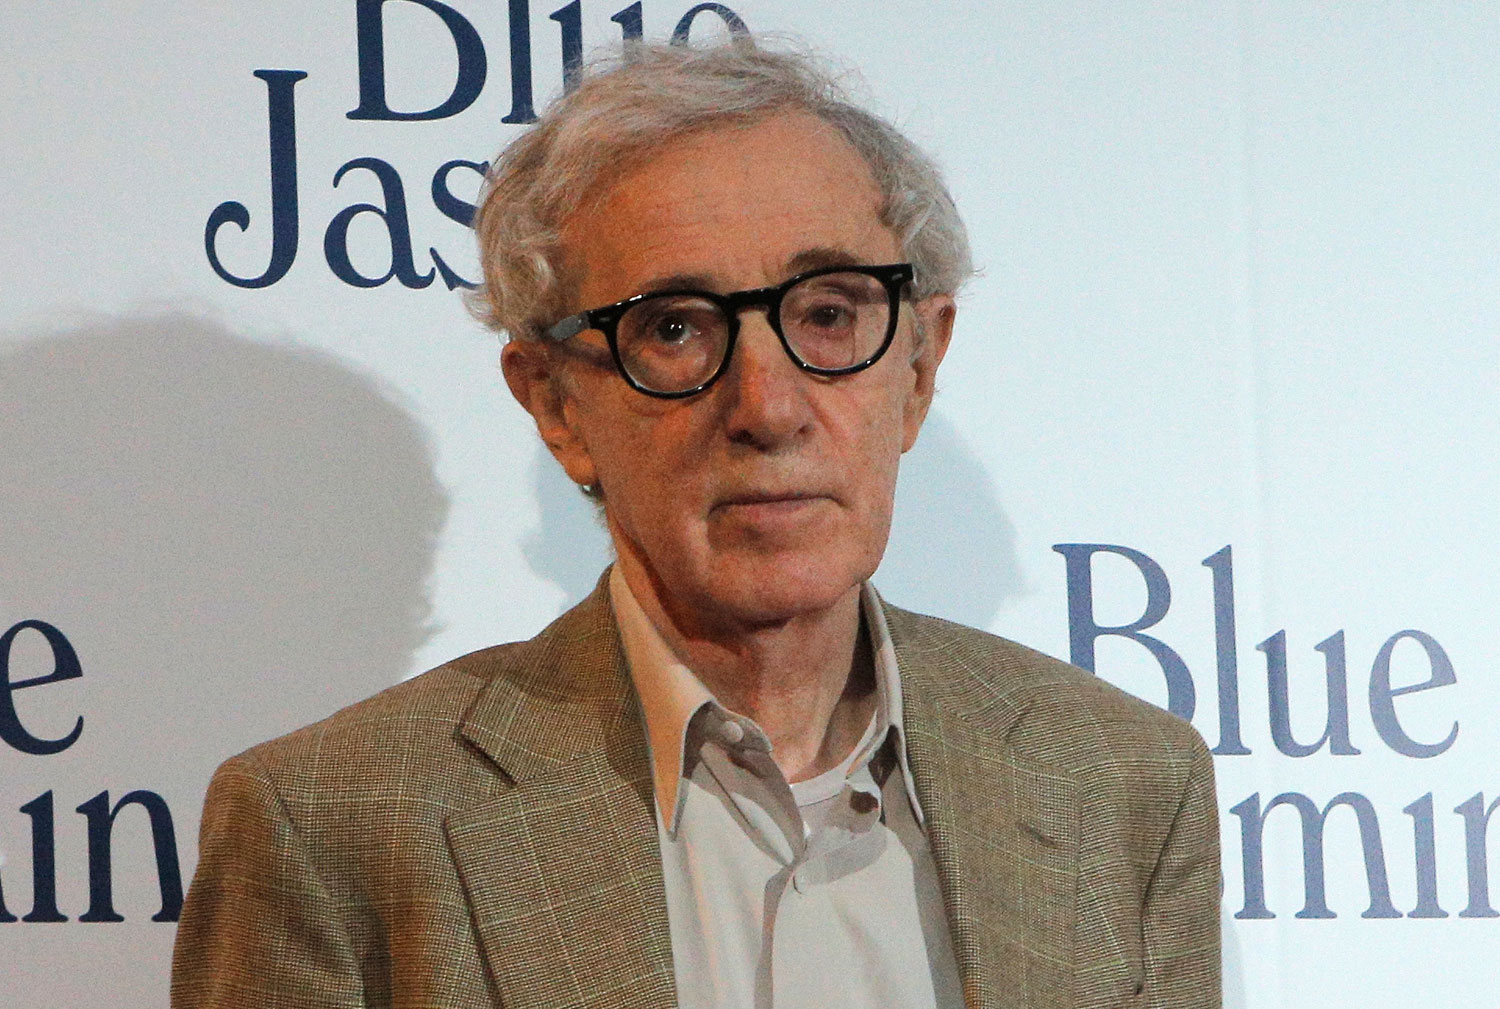 Metanarrative and the Woody Allen Sex Abuse Case